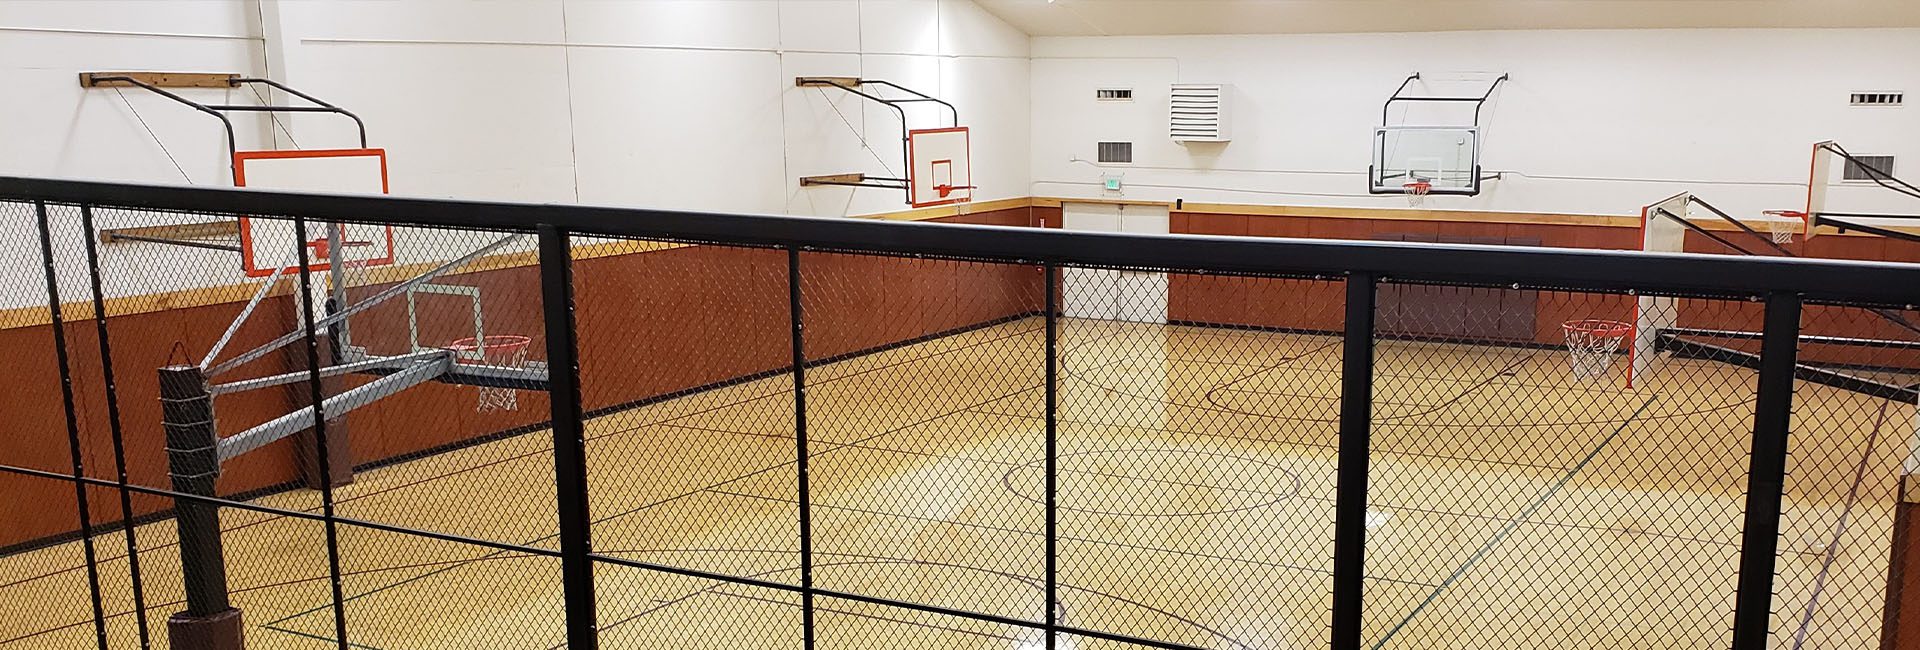 Gyms With Basketball Volleyball Courts Near Me Coeur D Alene